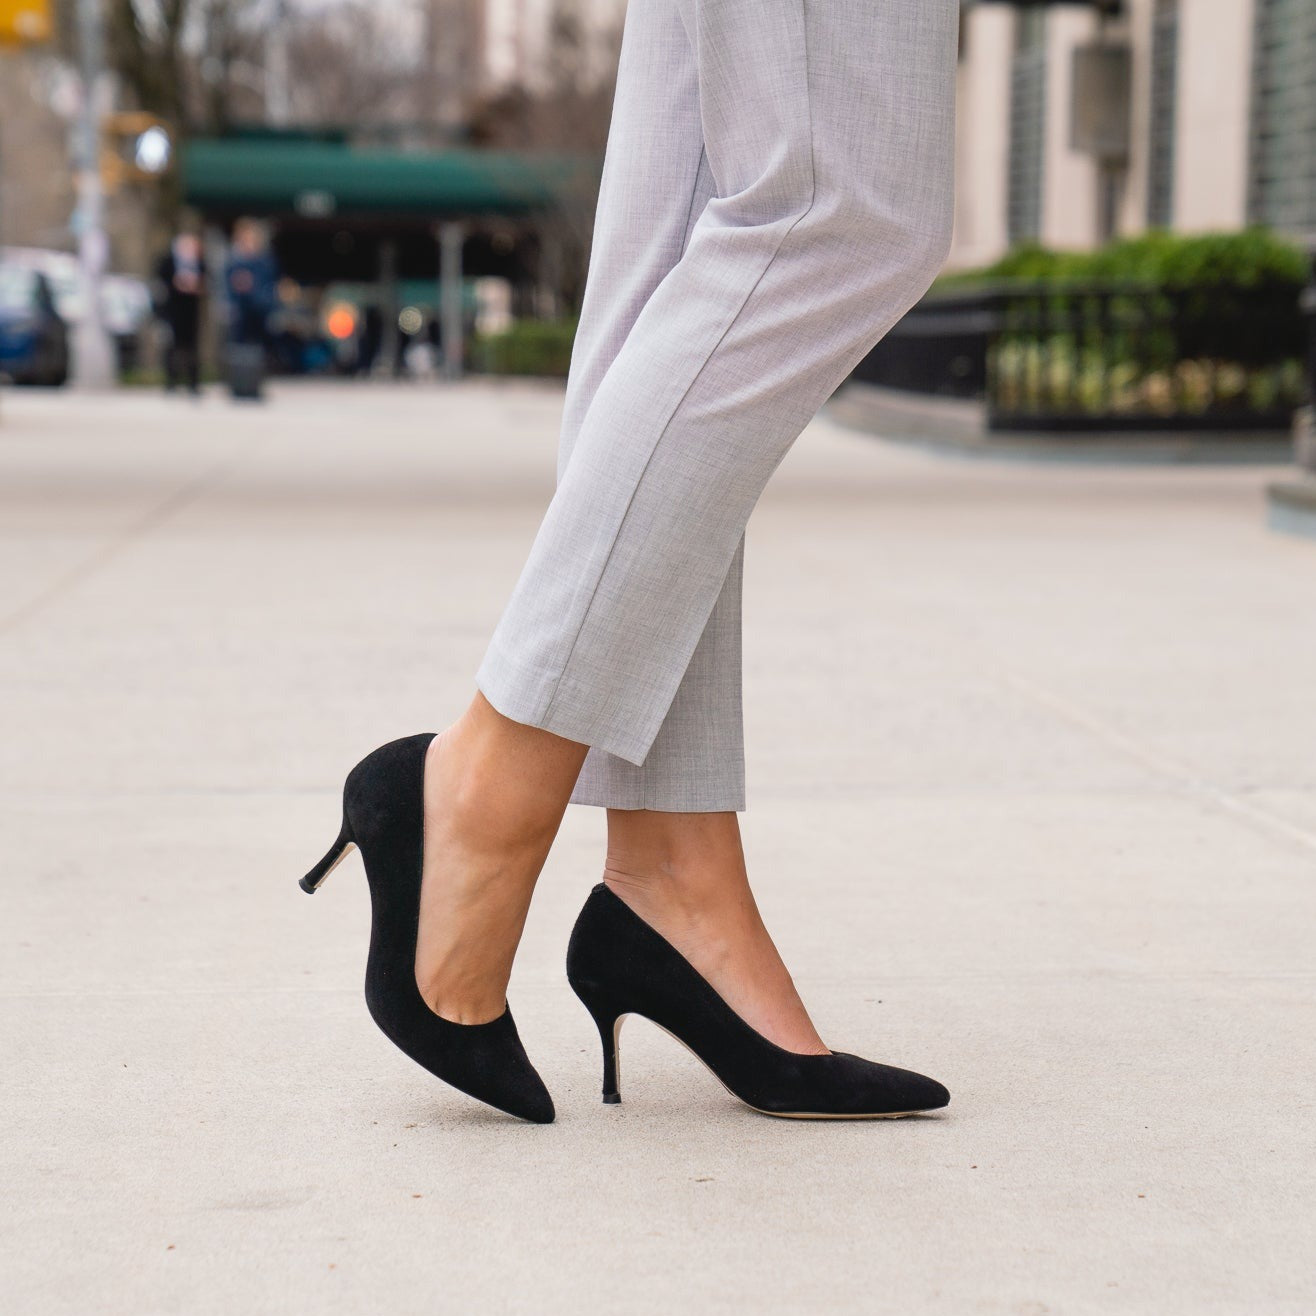 Truffle 4.0 Suede Pumps: Comfort & Style in Every Step